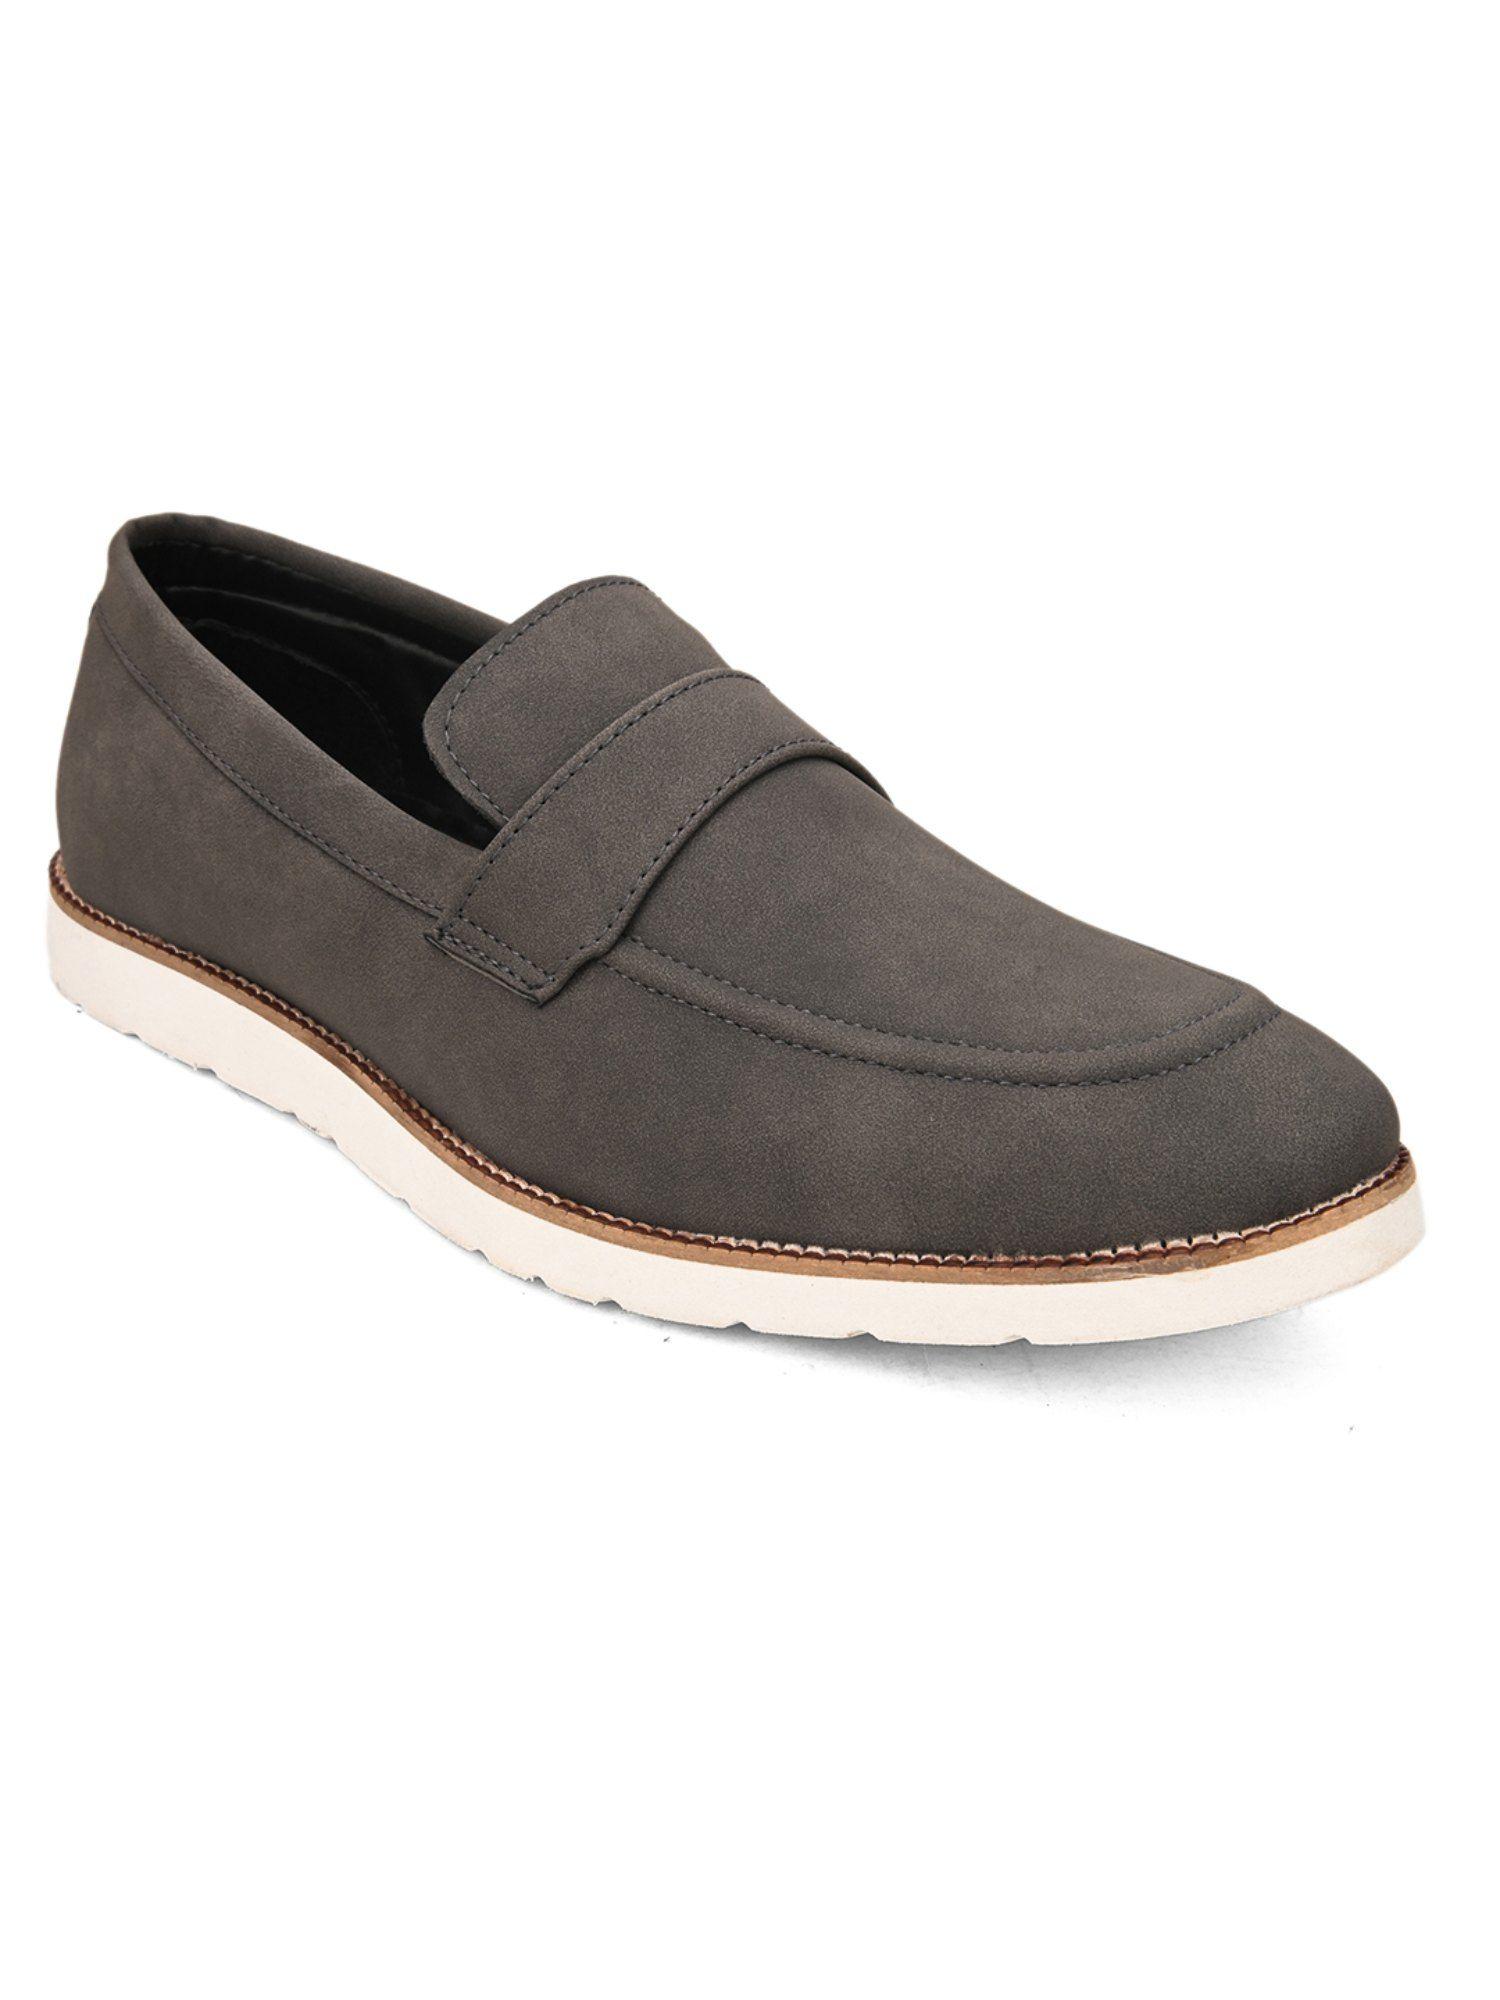 grey-casual-synthetic-slip-ons-shoes-for-men